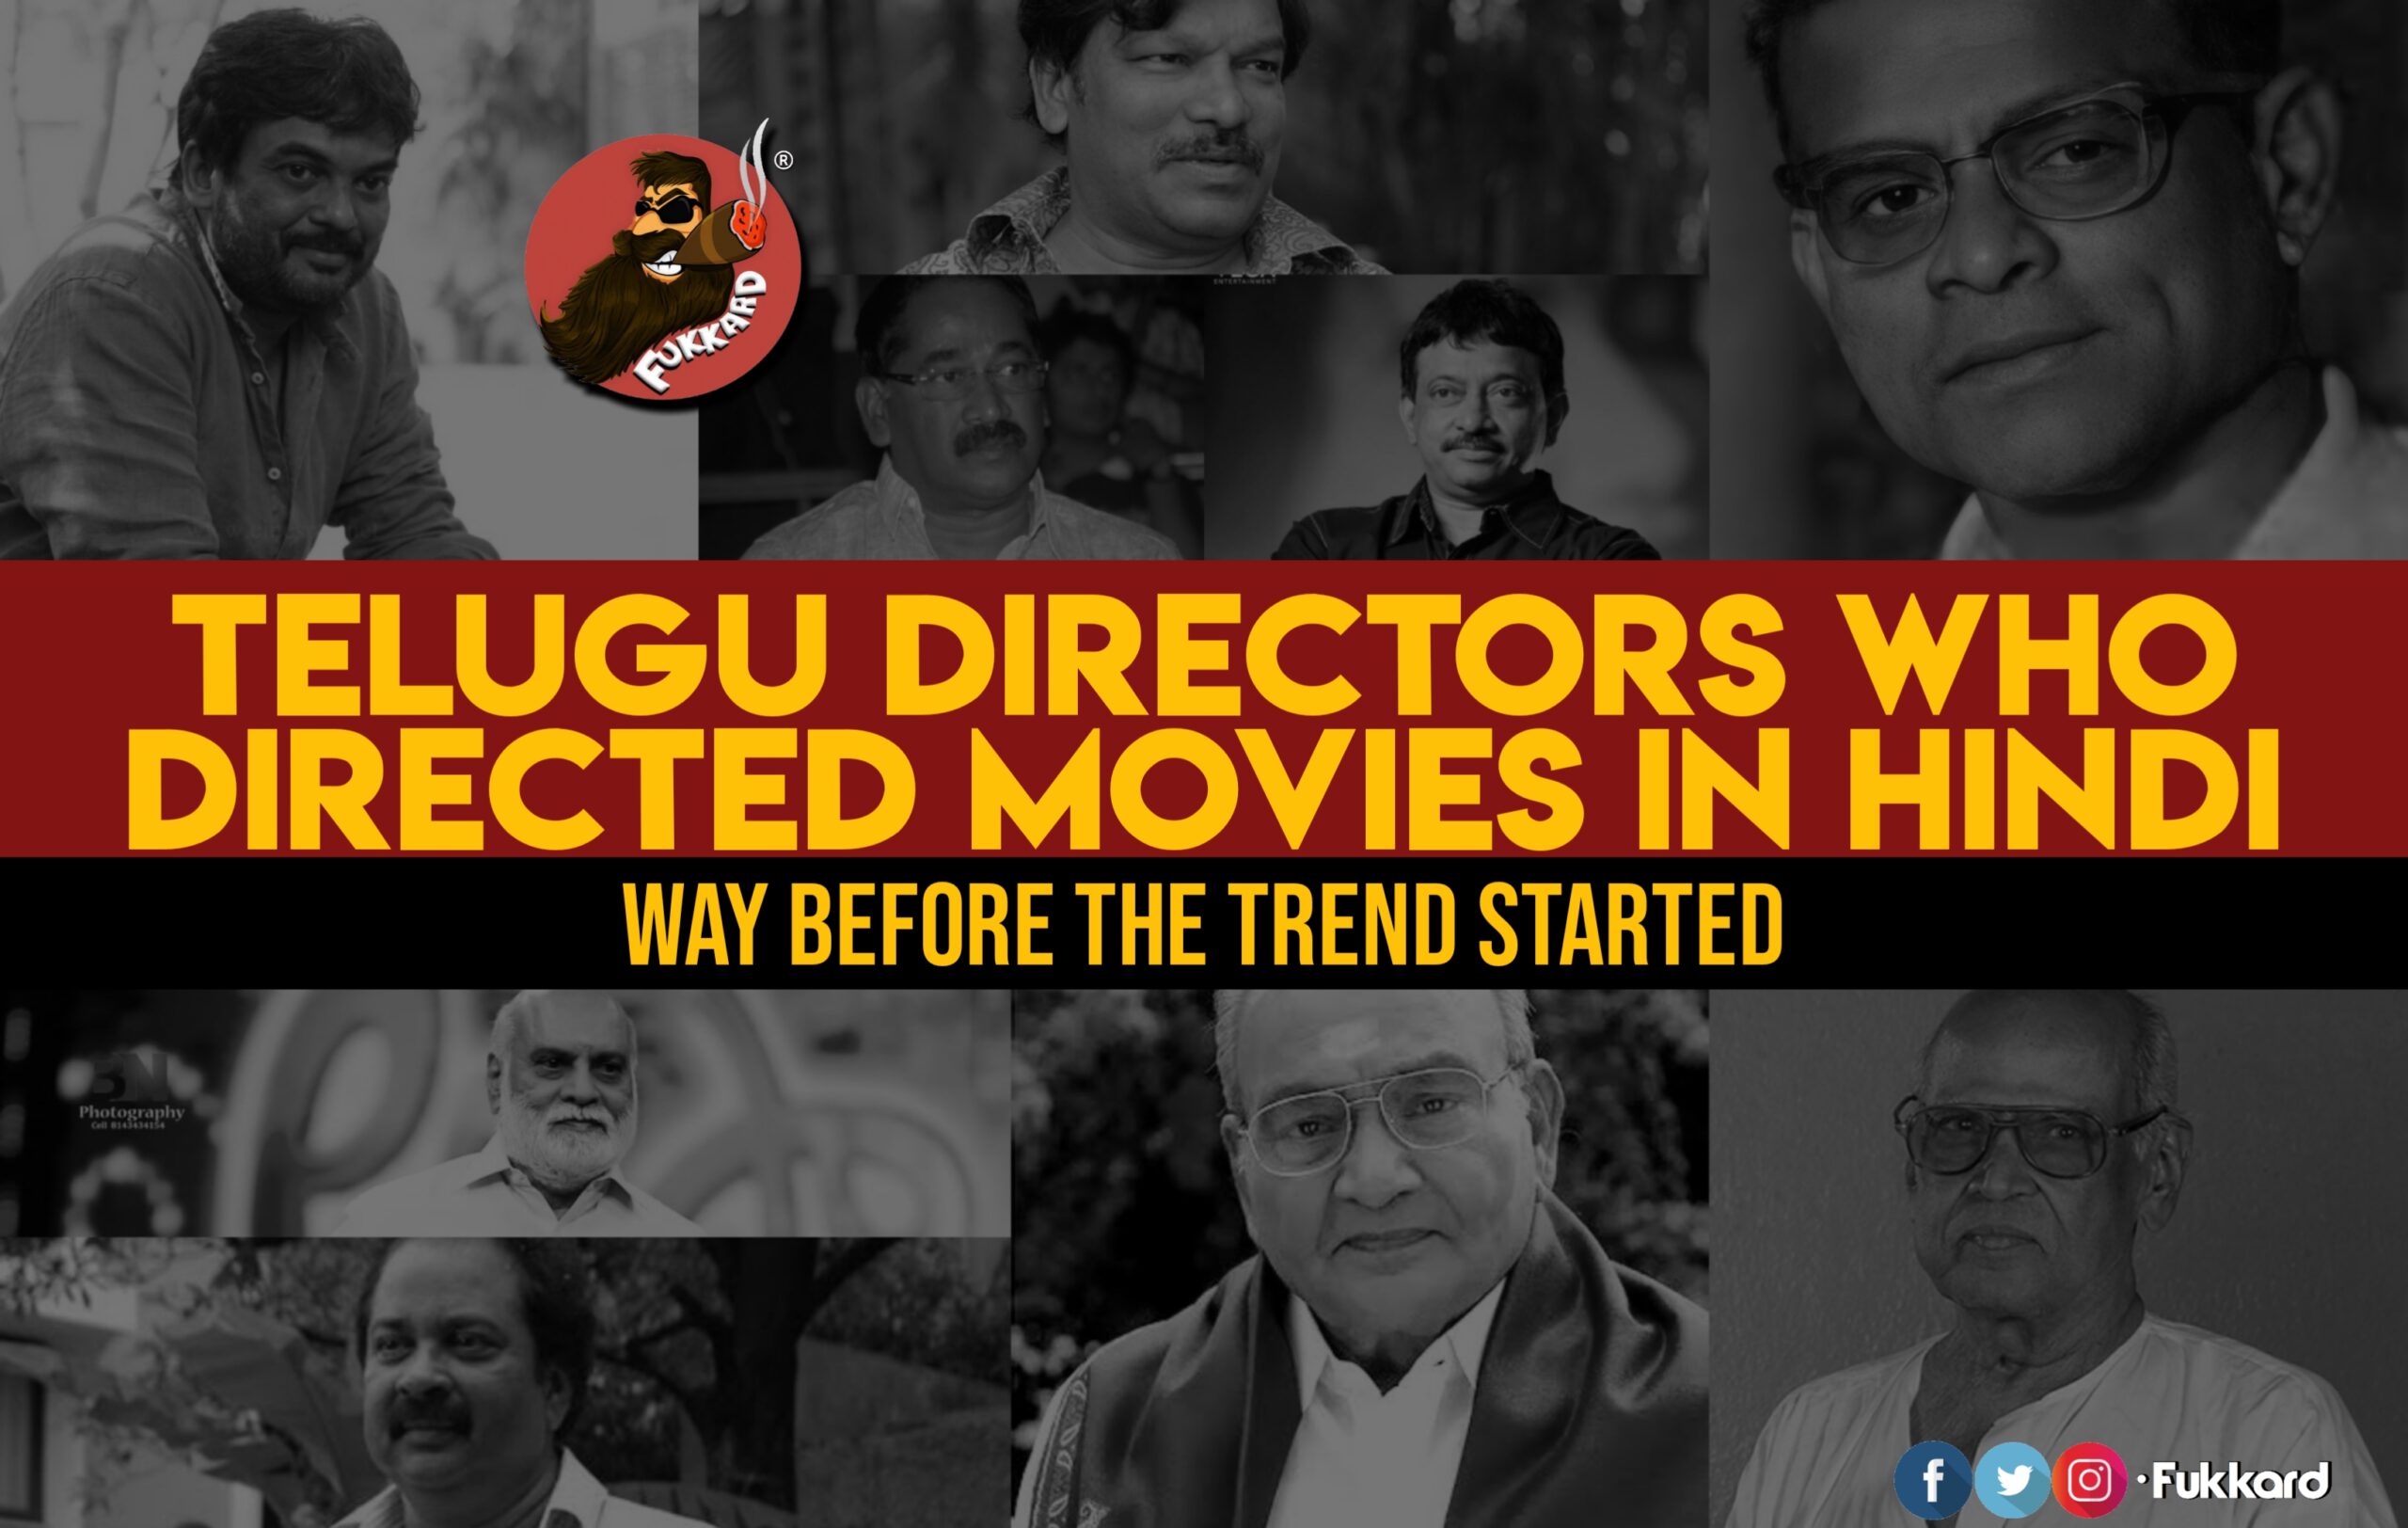  Telugu directors who directed movies in Hindi, way before the trend started!